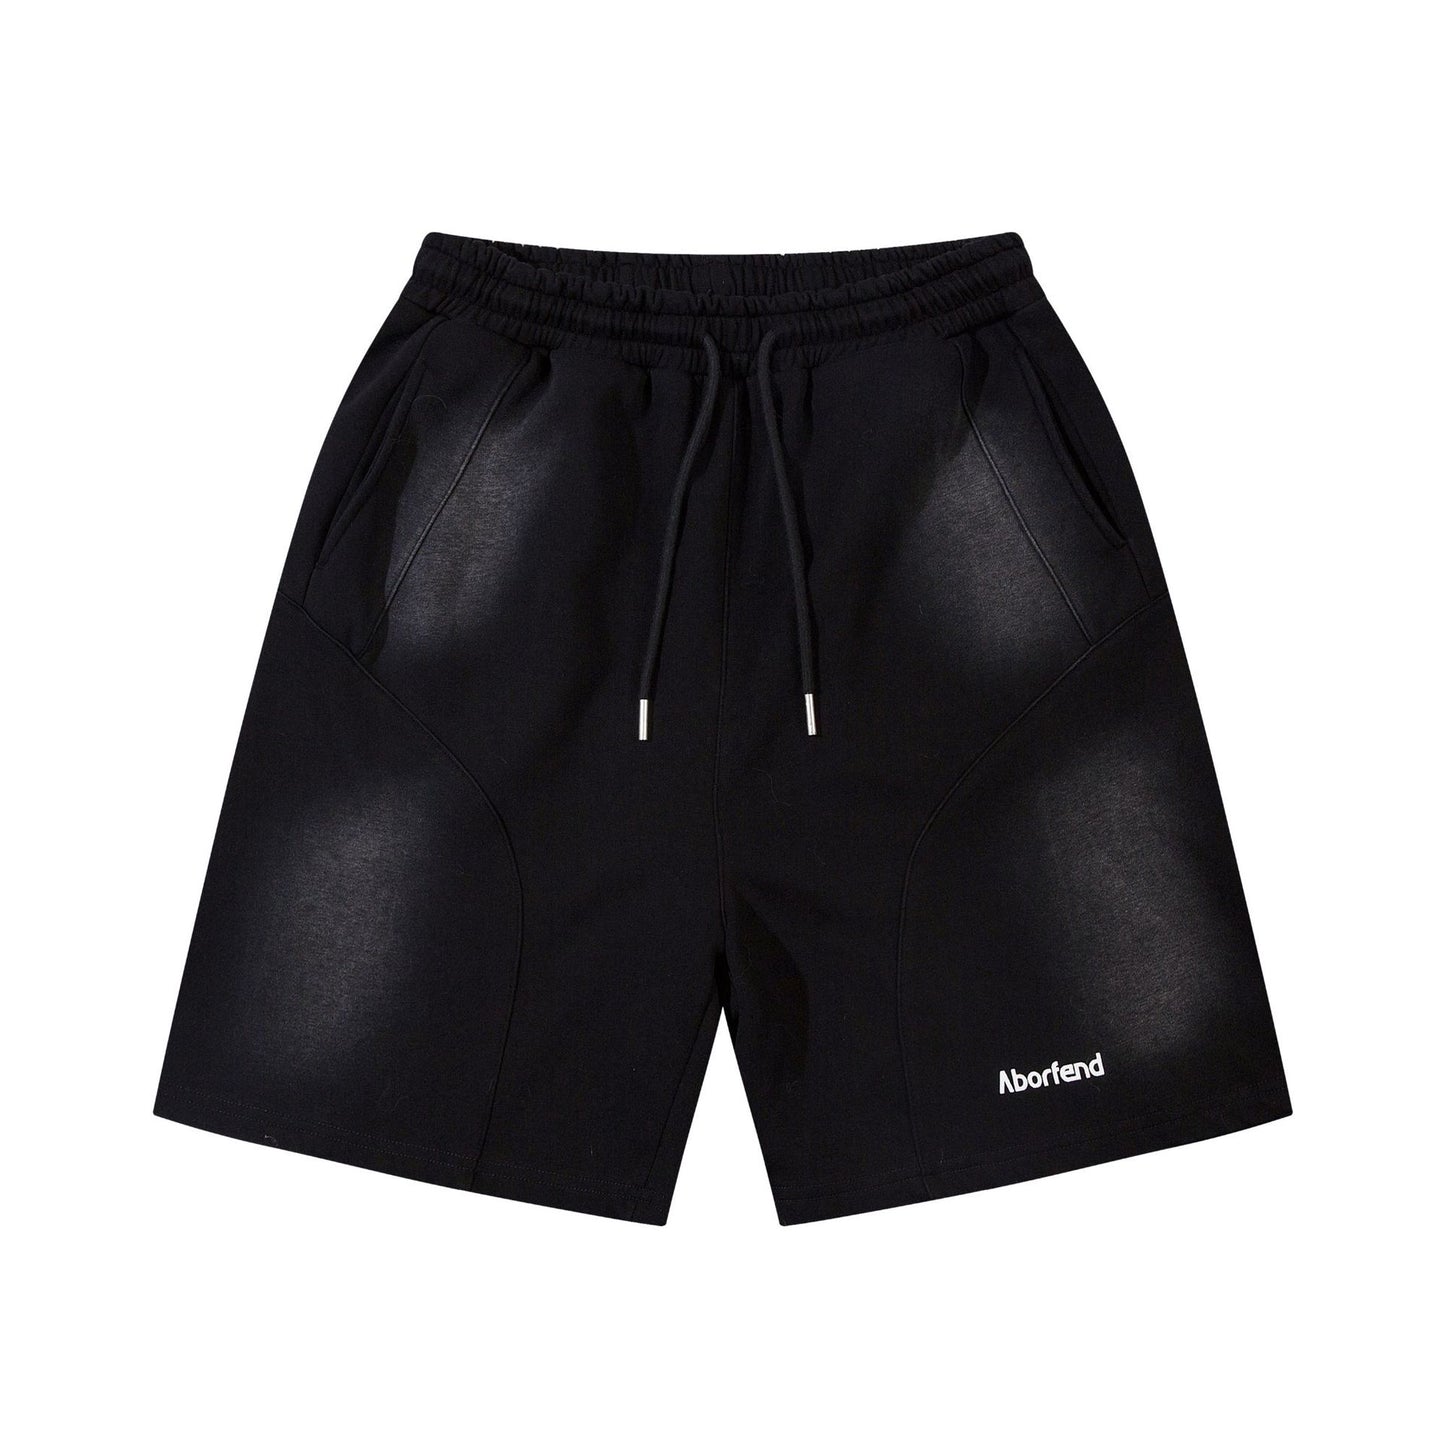 Men's And Women's Couple Shorts Casual